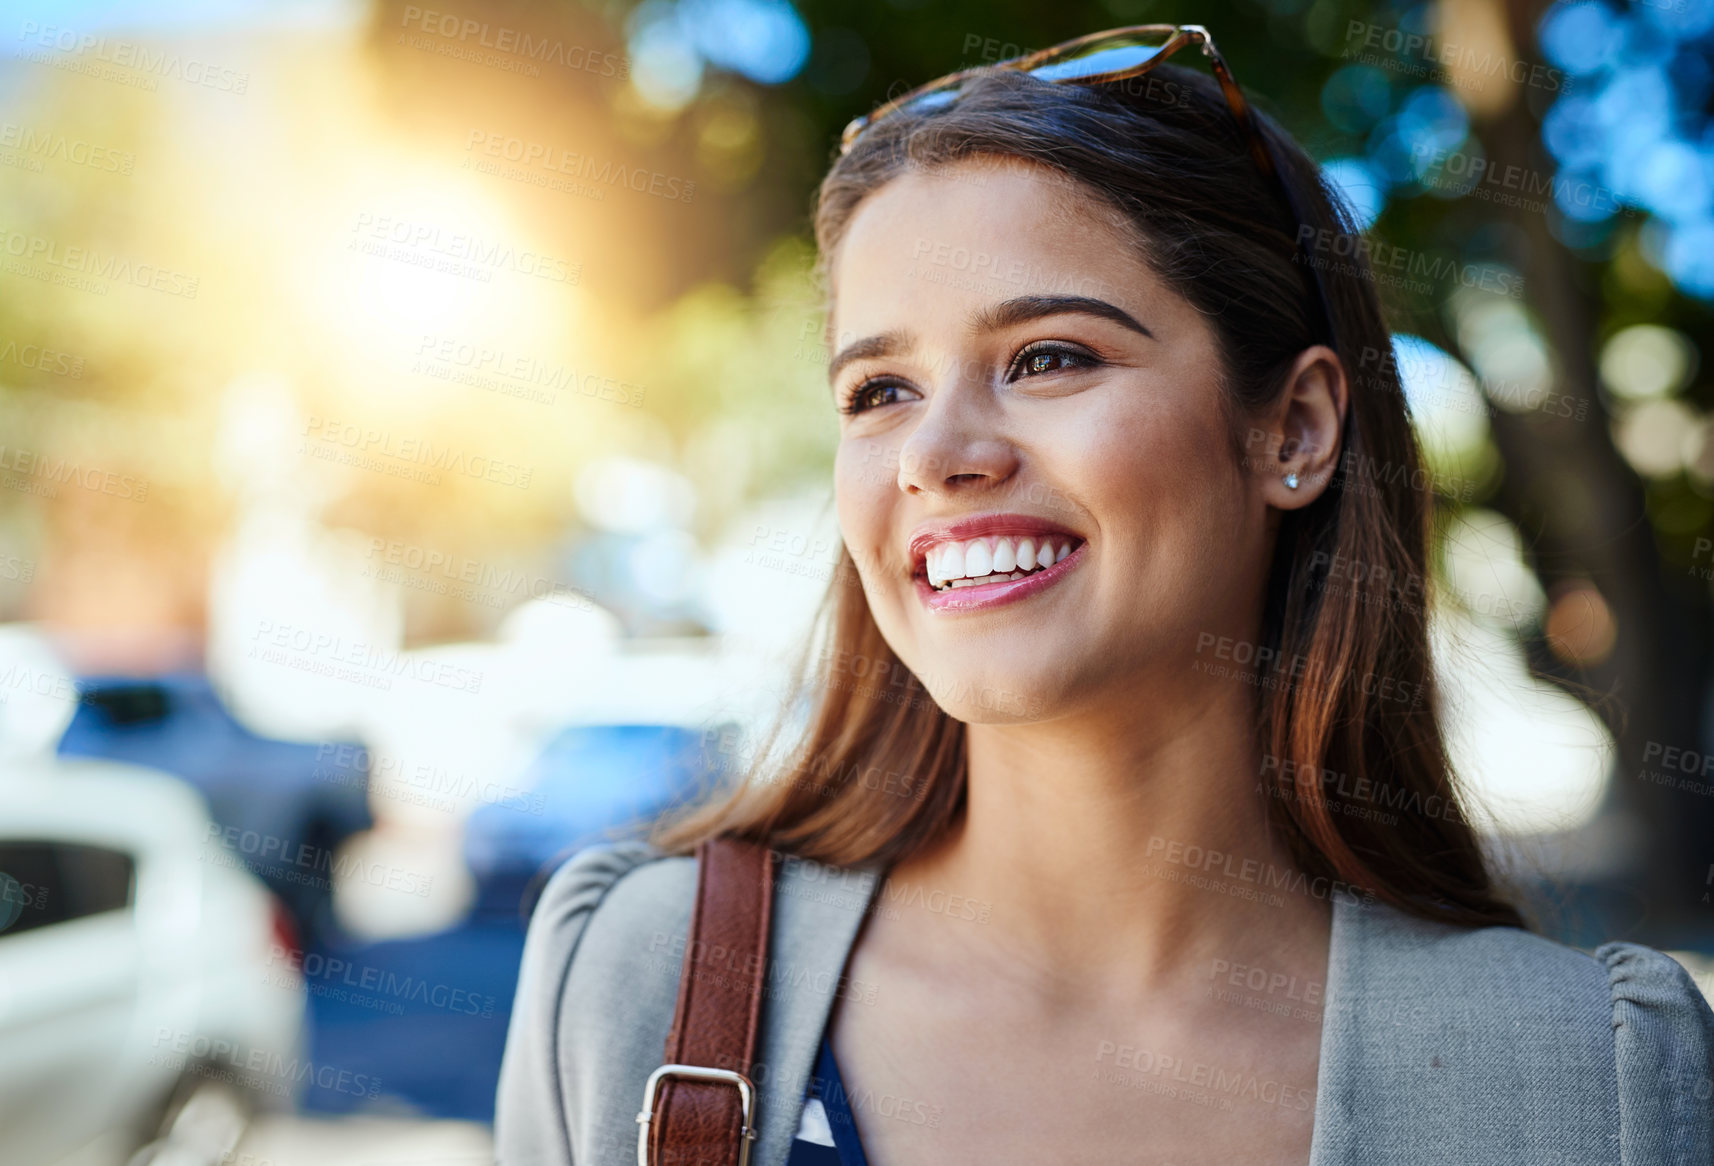 Buy stock photo Cropped shot of an attractive young woman on her morning commute to work